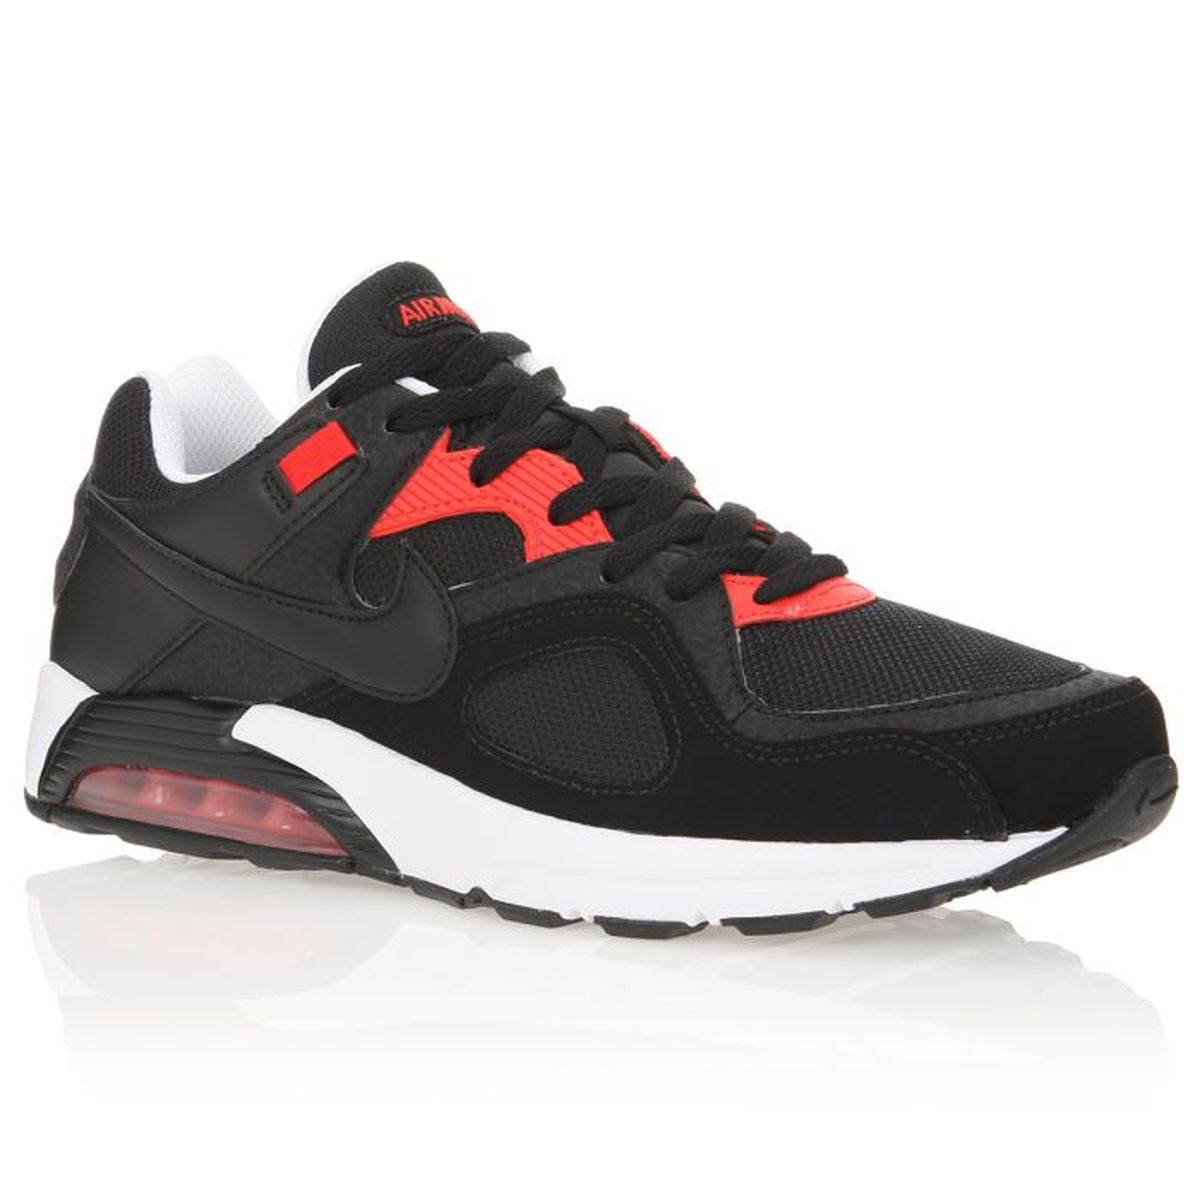 NIKE Baskets AIR MAX GO STRONG ESSENTIAL Homme Noir rouge - Cdiscount